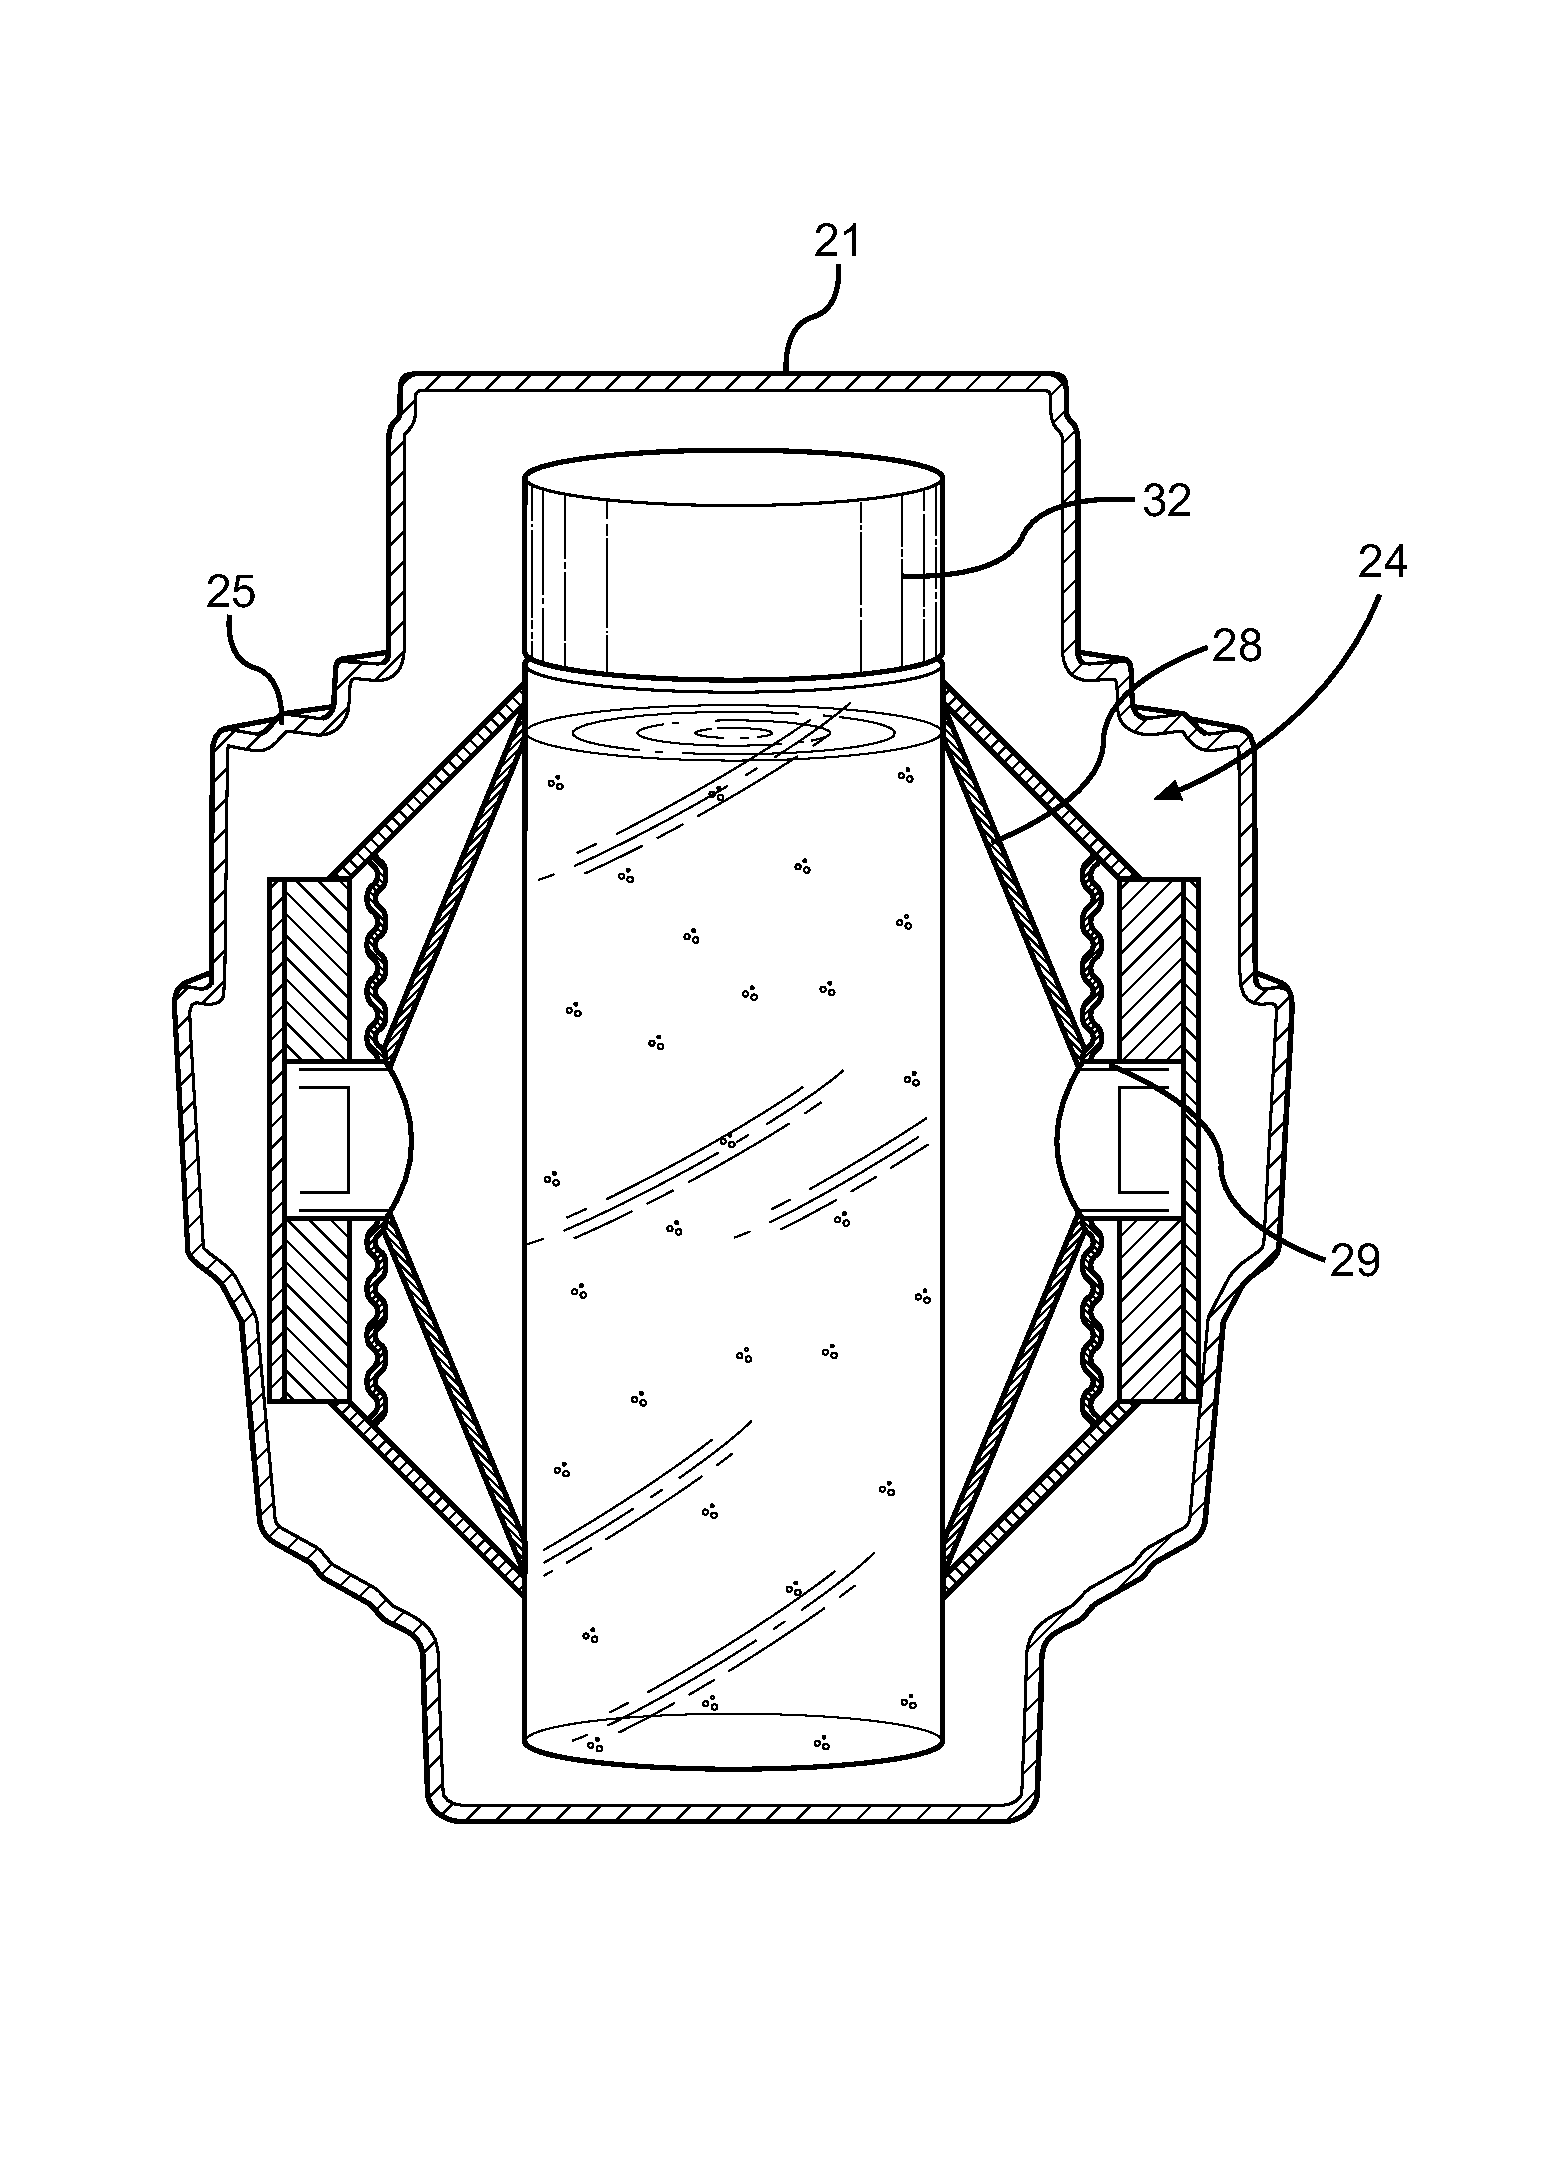 Audio device for altering water structure